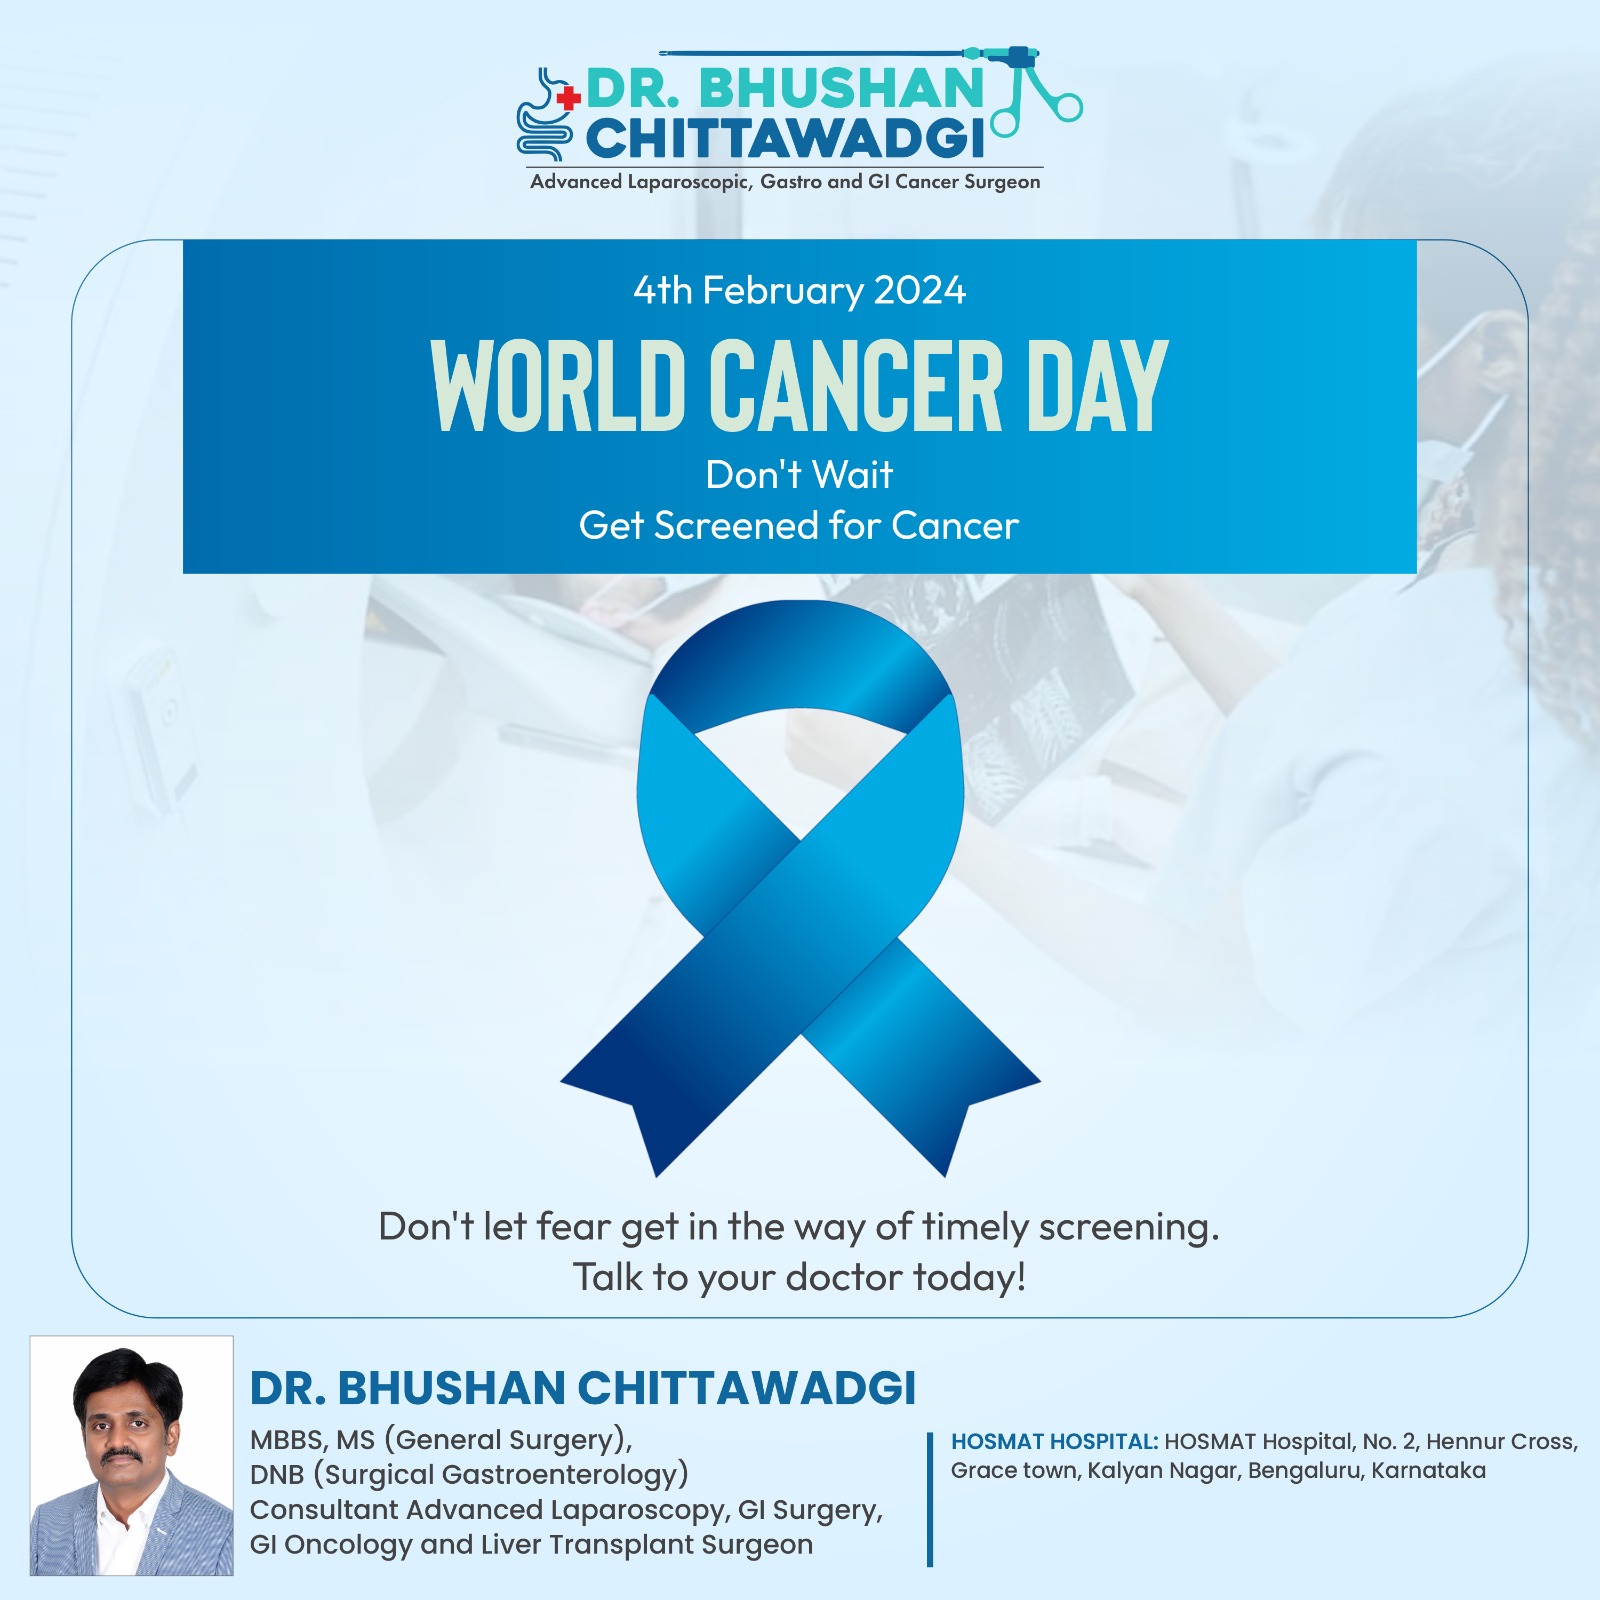 surgical Oncologist in Bangalore ,Bangalore,Hospitals,Free Classifieds,Post Free Ads,77traders.com